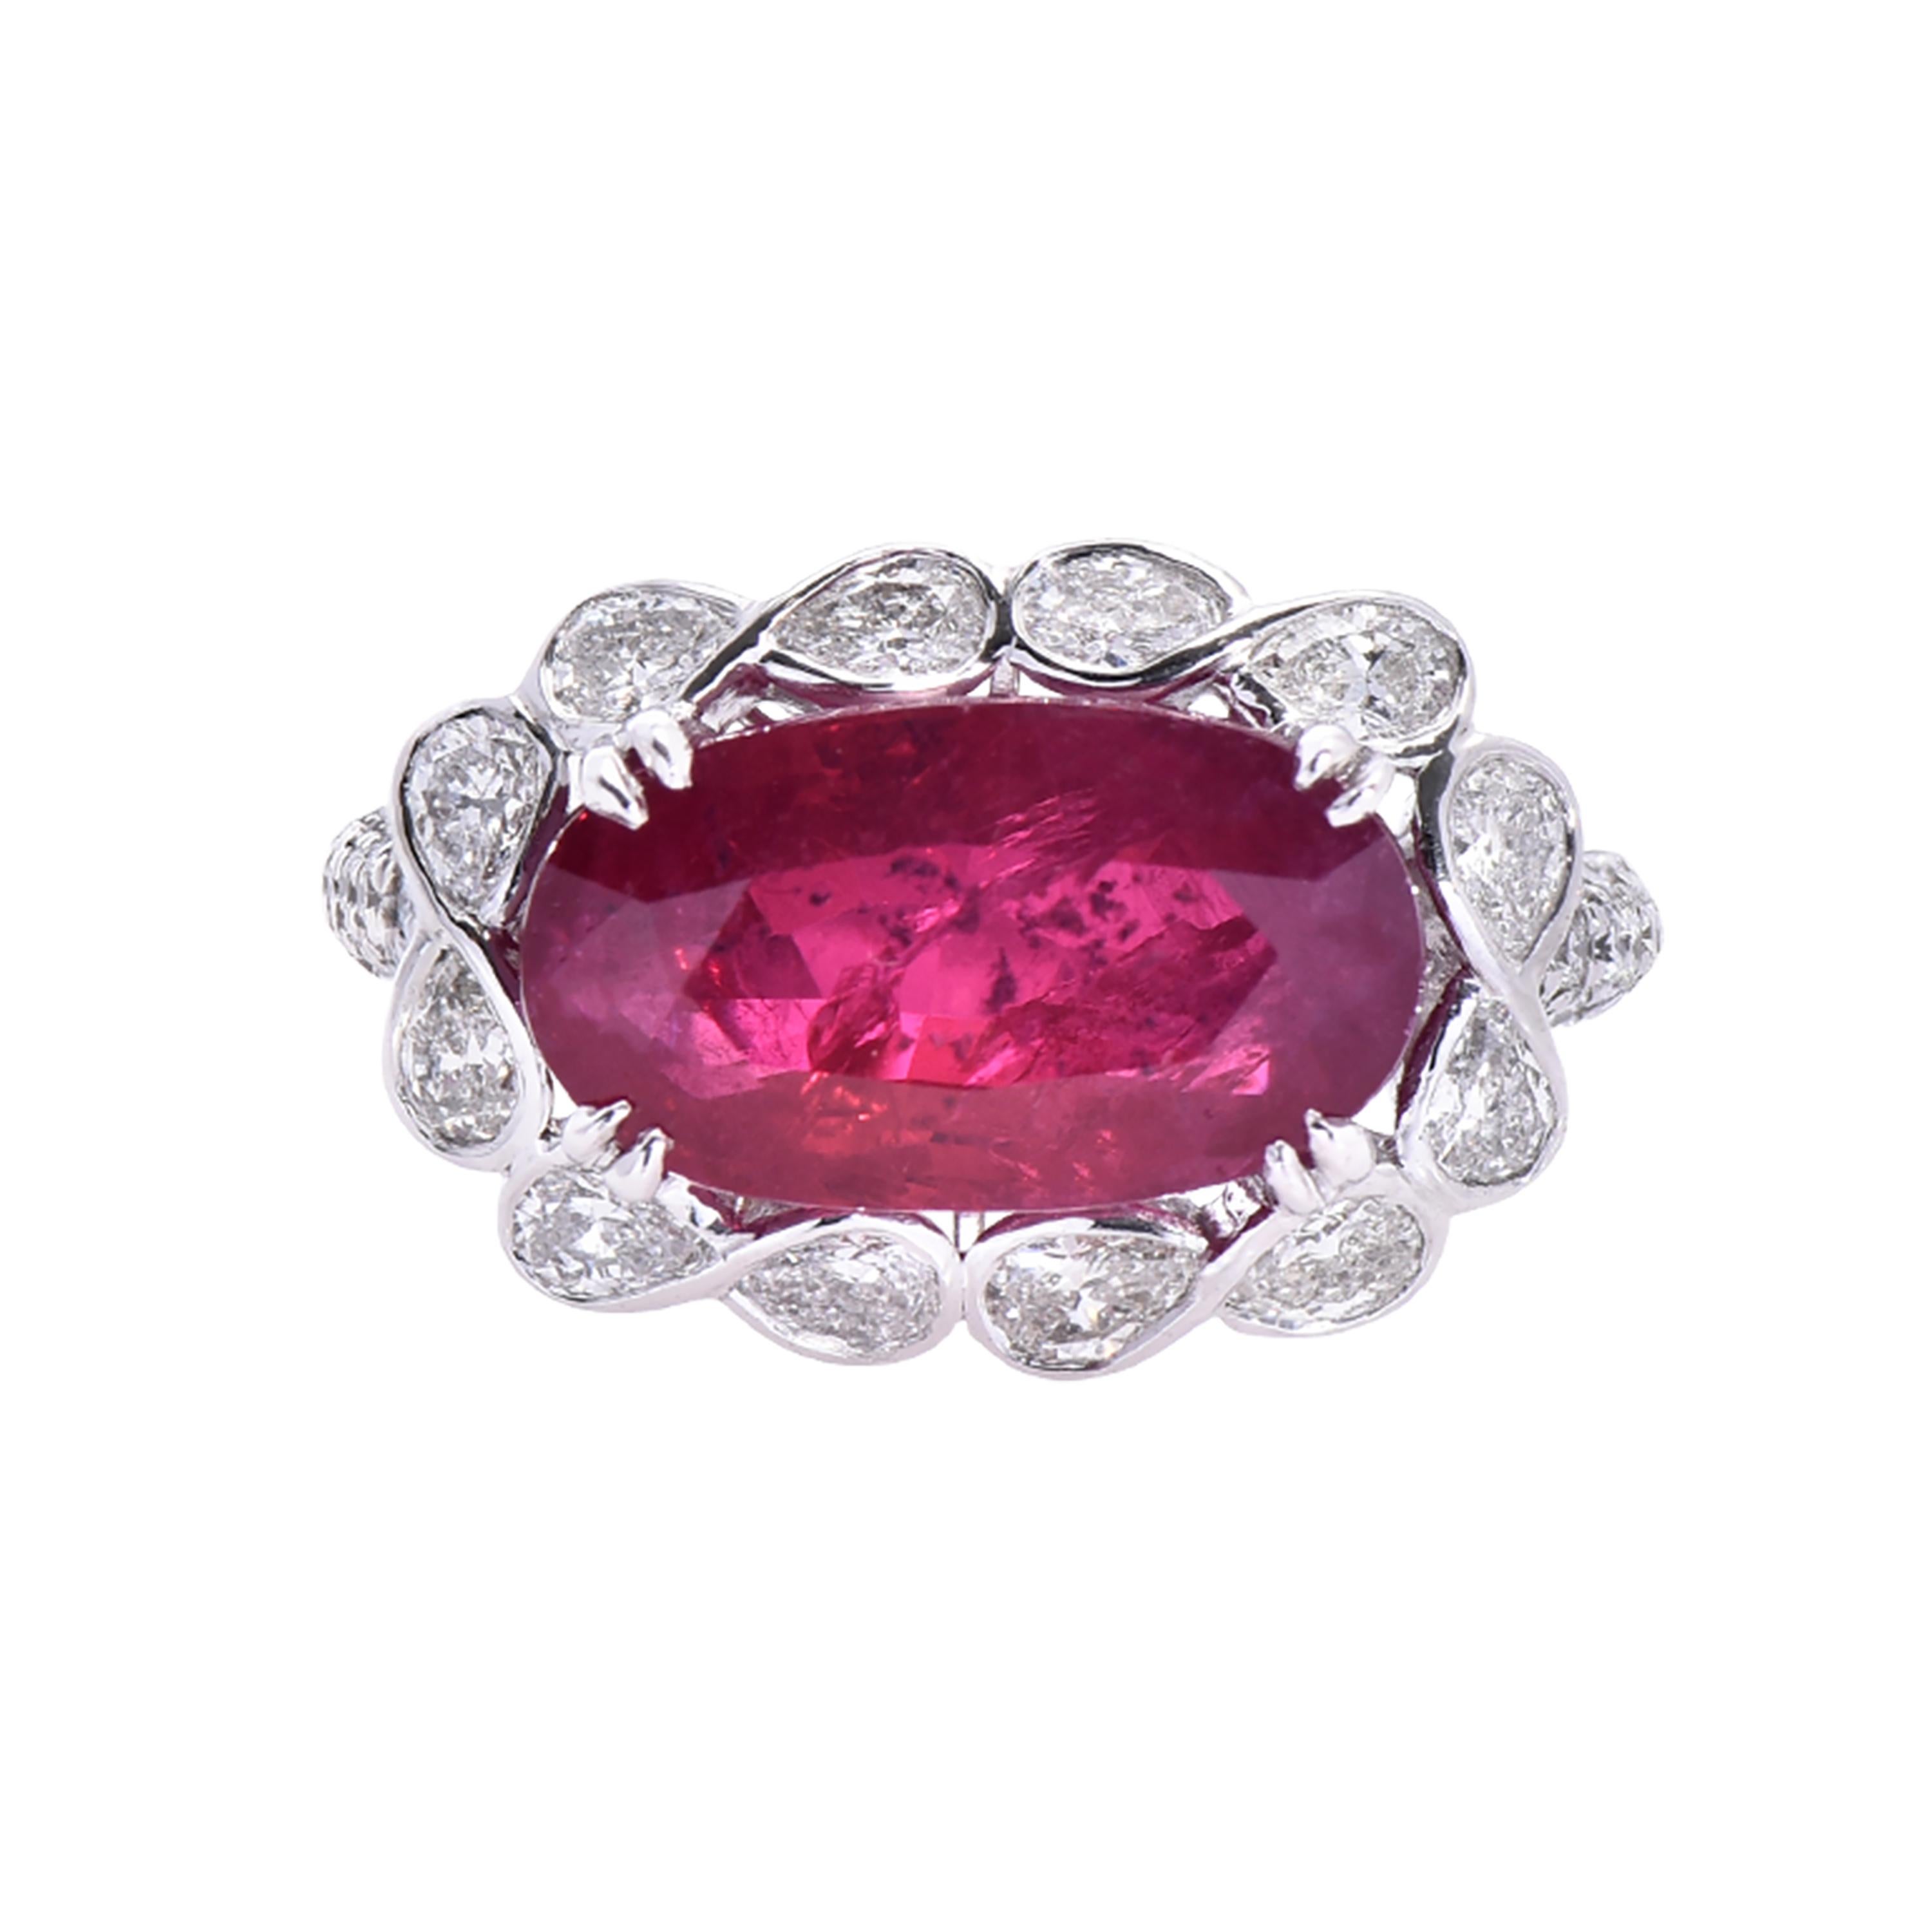 18 karat white gold ruby ring and diamond cocktail ring from Laviere's Scarlet Collection. The ring is set with a precious 9.68 carat GRS certified unheated ruby and 1.4 carat diamonds. 
Gross Weight of the Ring: 8.94 grams. Diamonds Color/Clarity